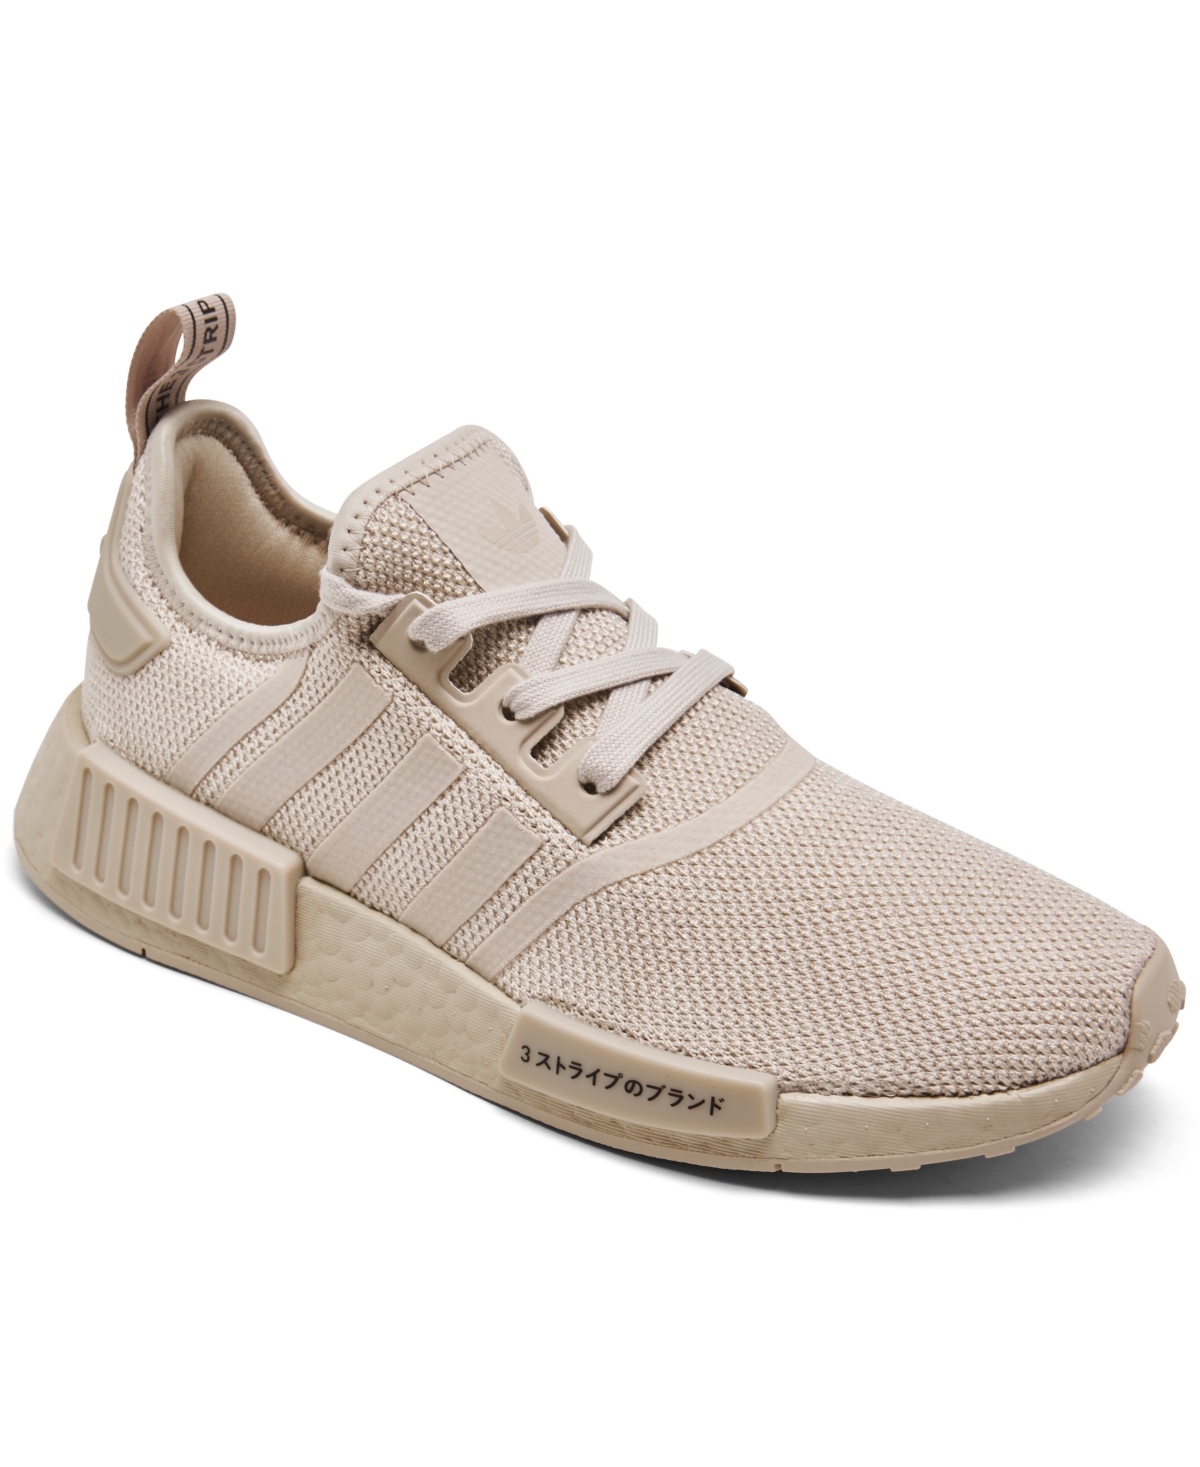 adidas Womens Nmd R1 Casual Sneakers from Finish Line